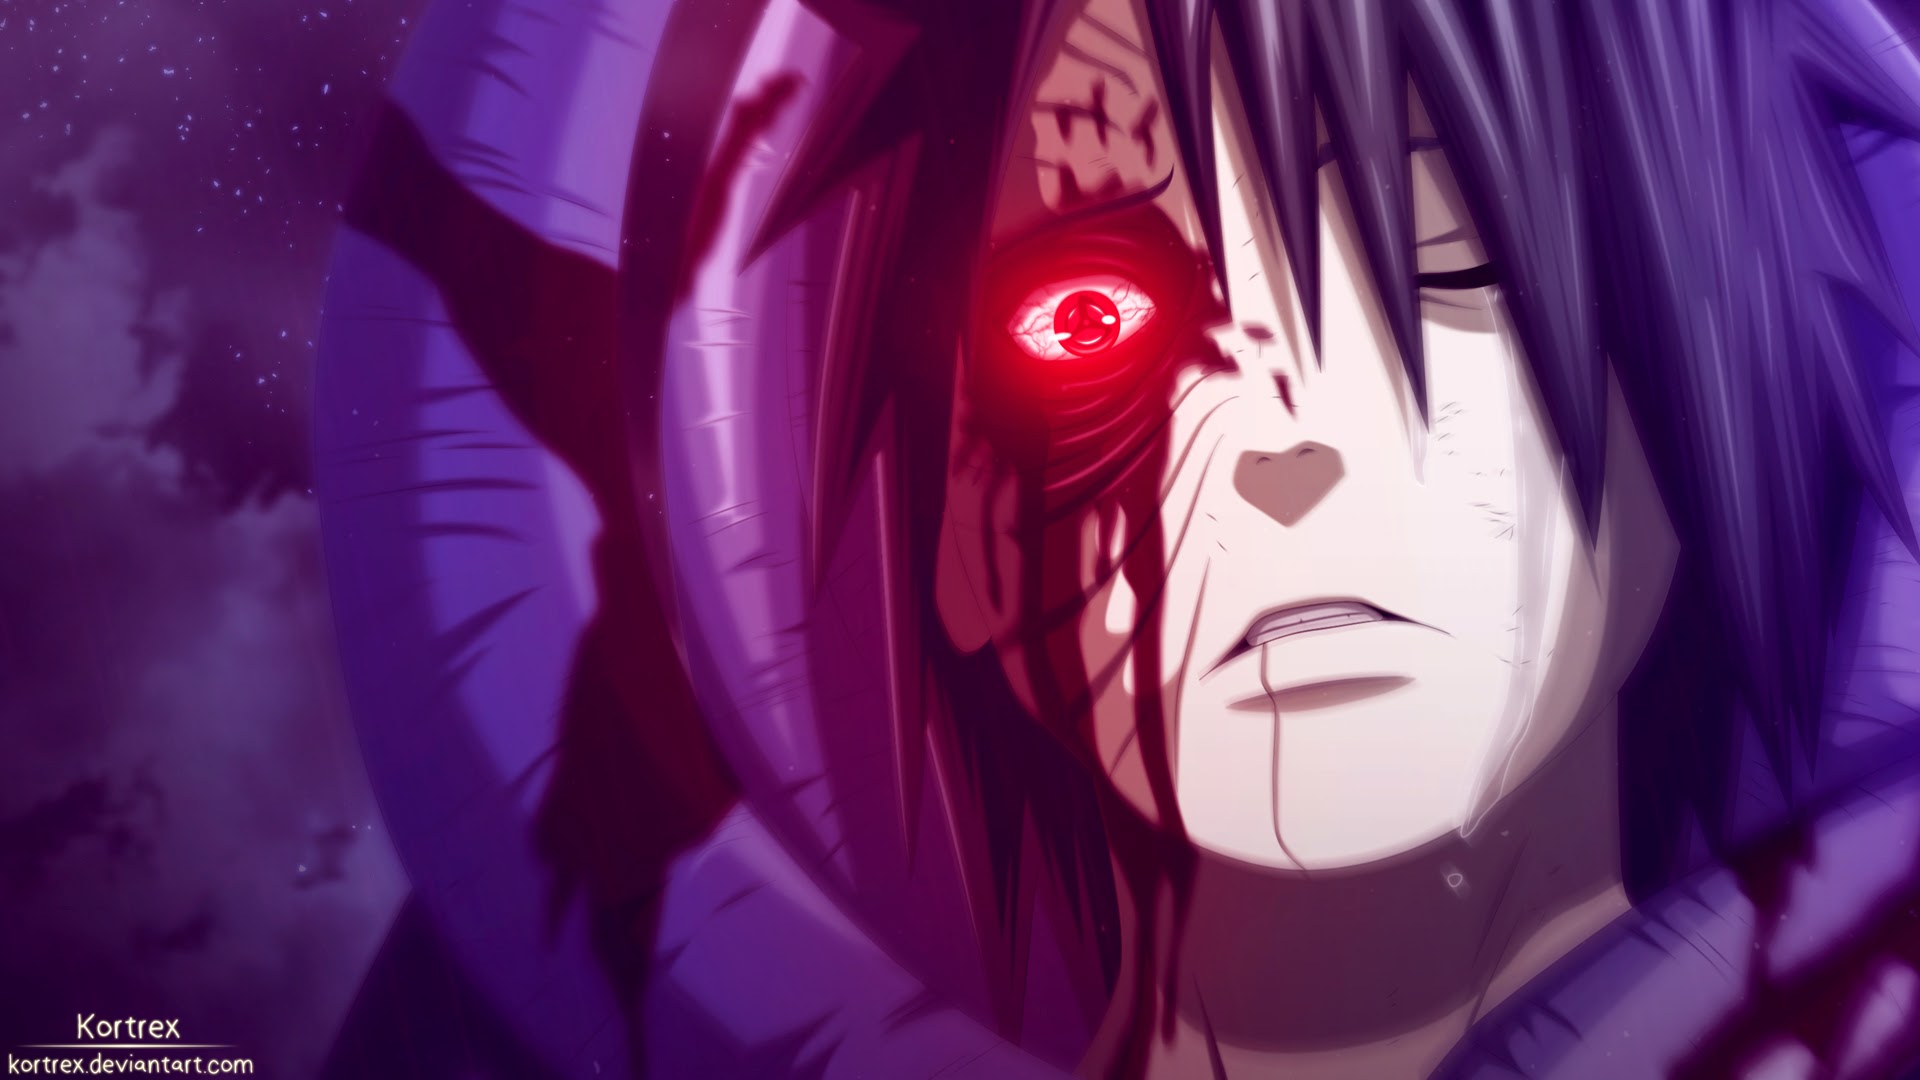 4k Obito Uchiha wallpaper Desktop, Android and iPhone